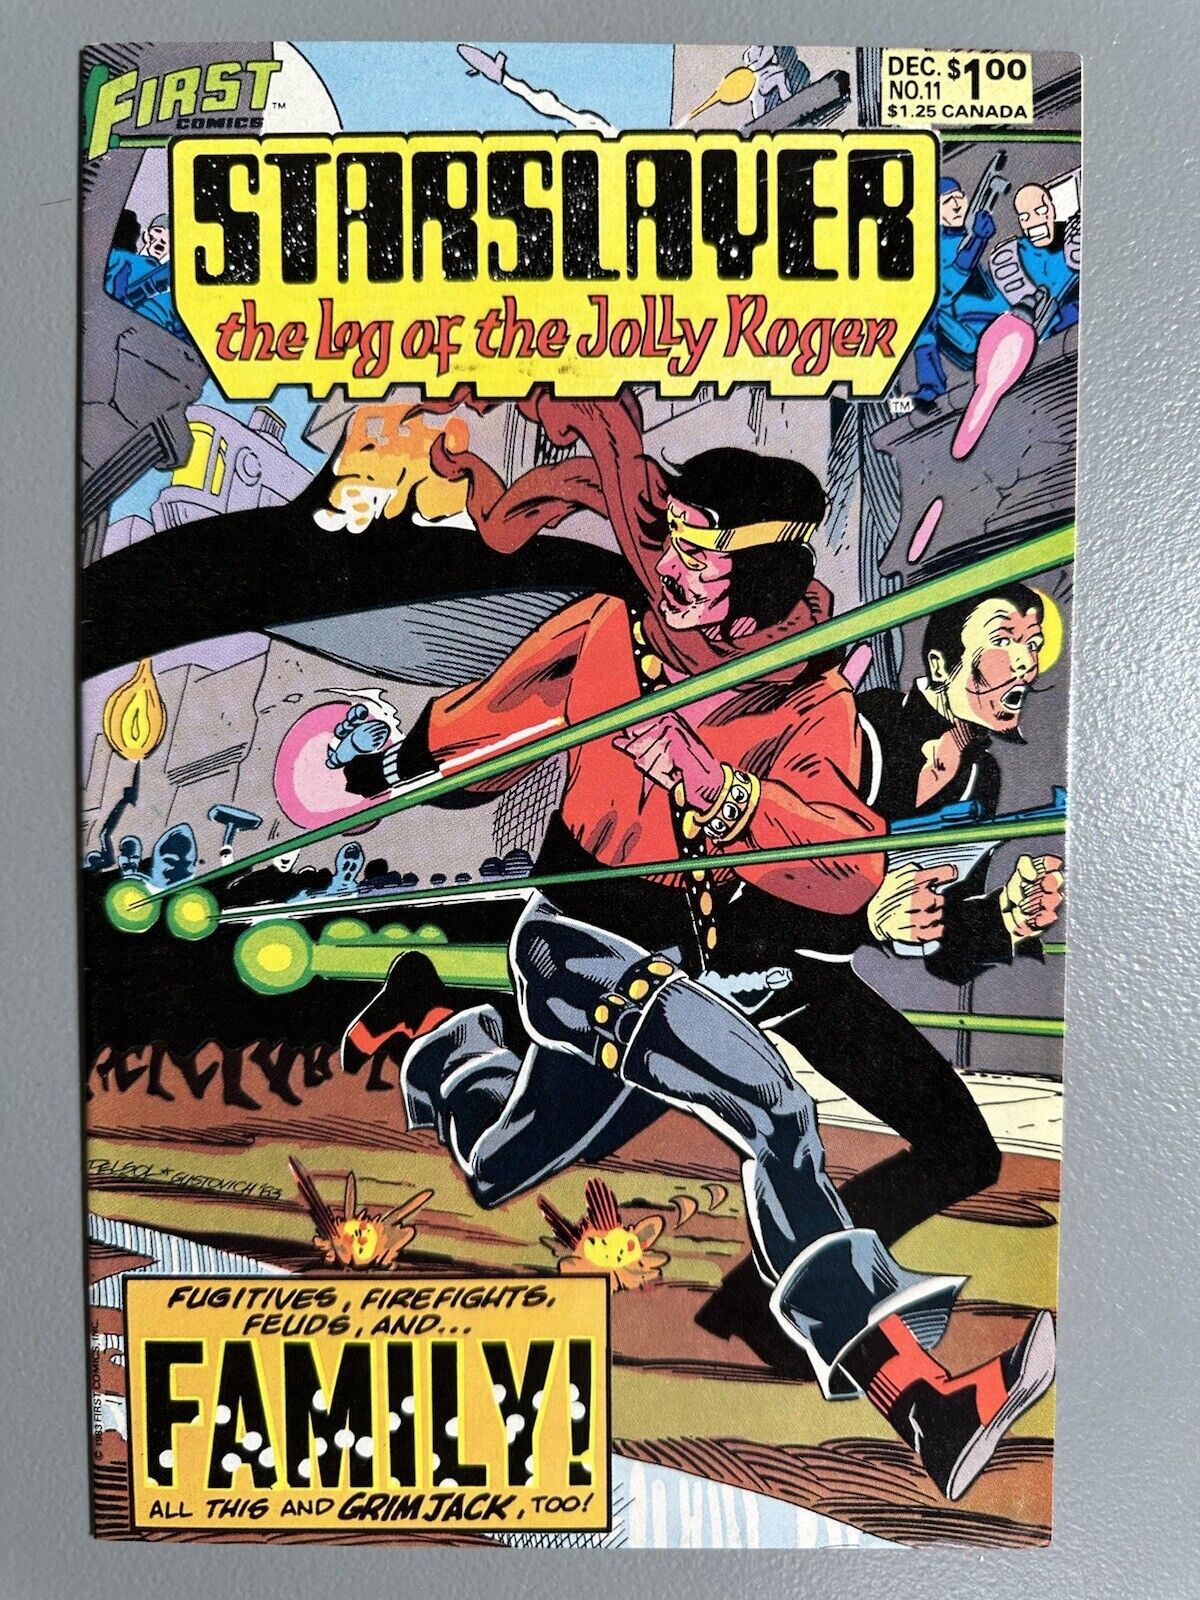 Starslayer 11, First Comics, Mike Grell CLASSIC, Grim Jack Story, 9.6